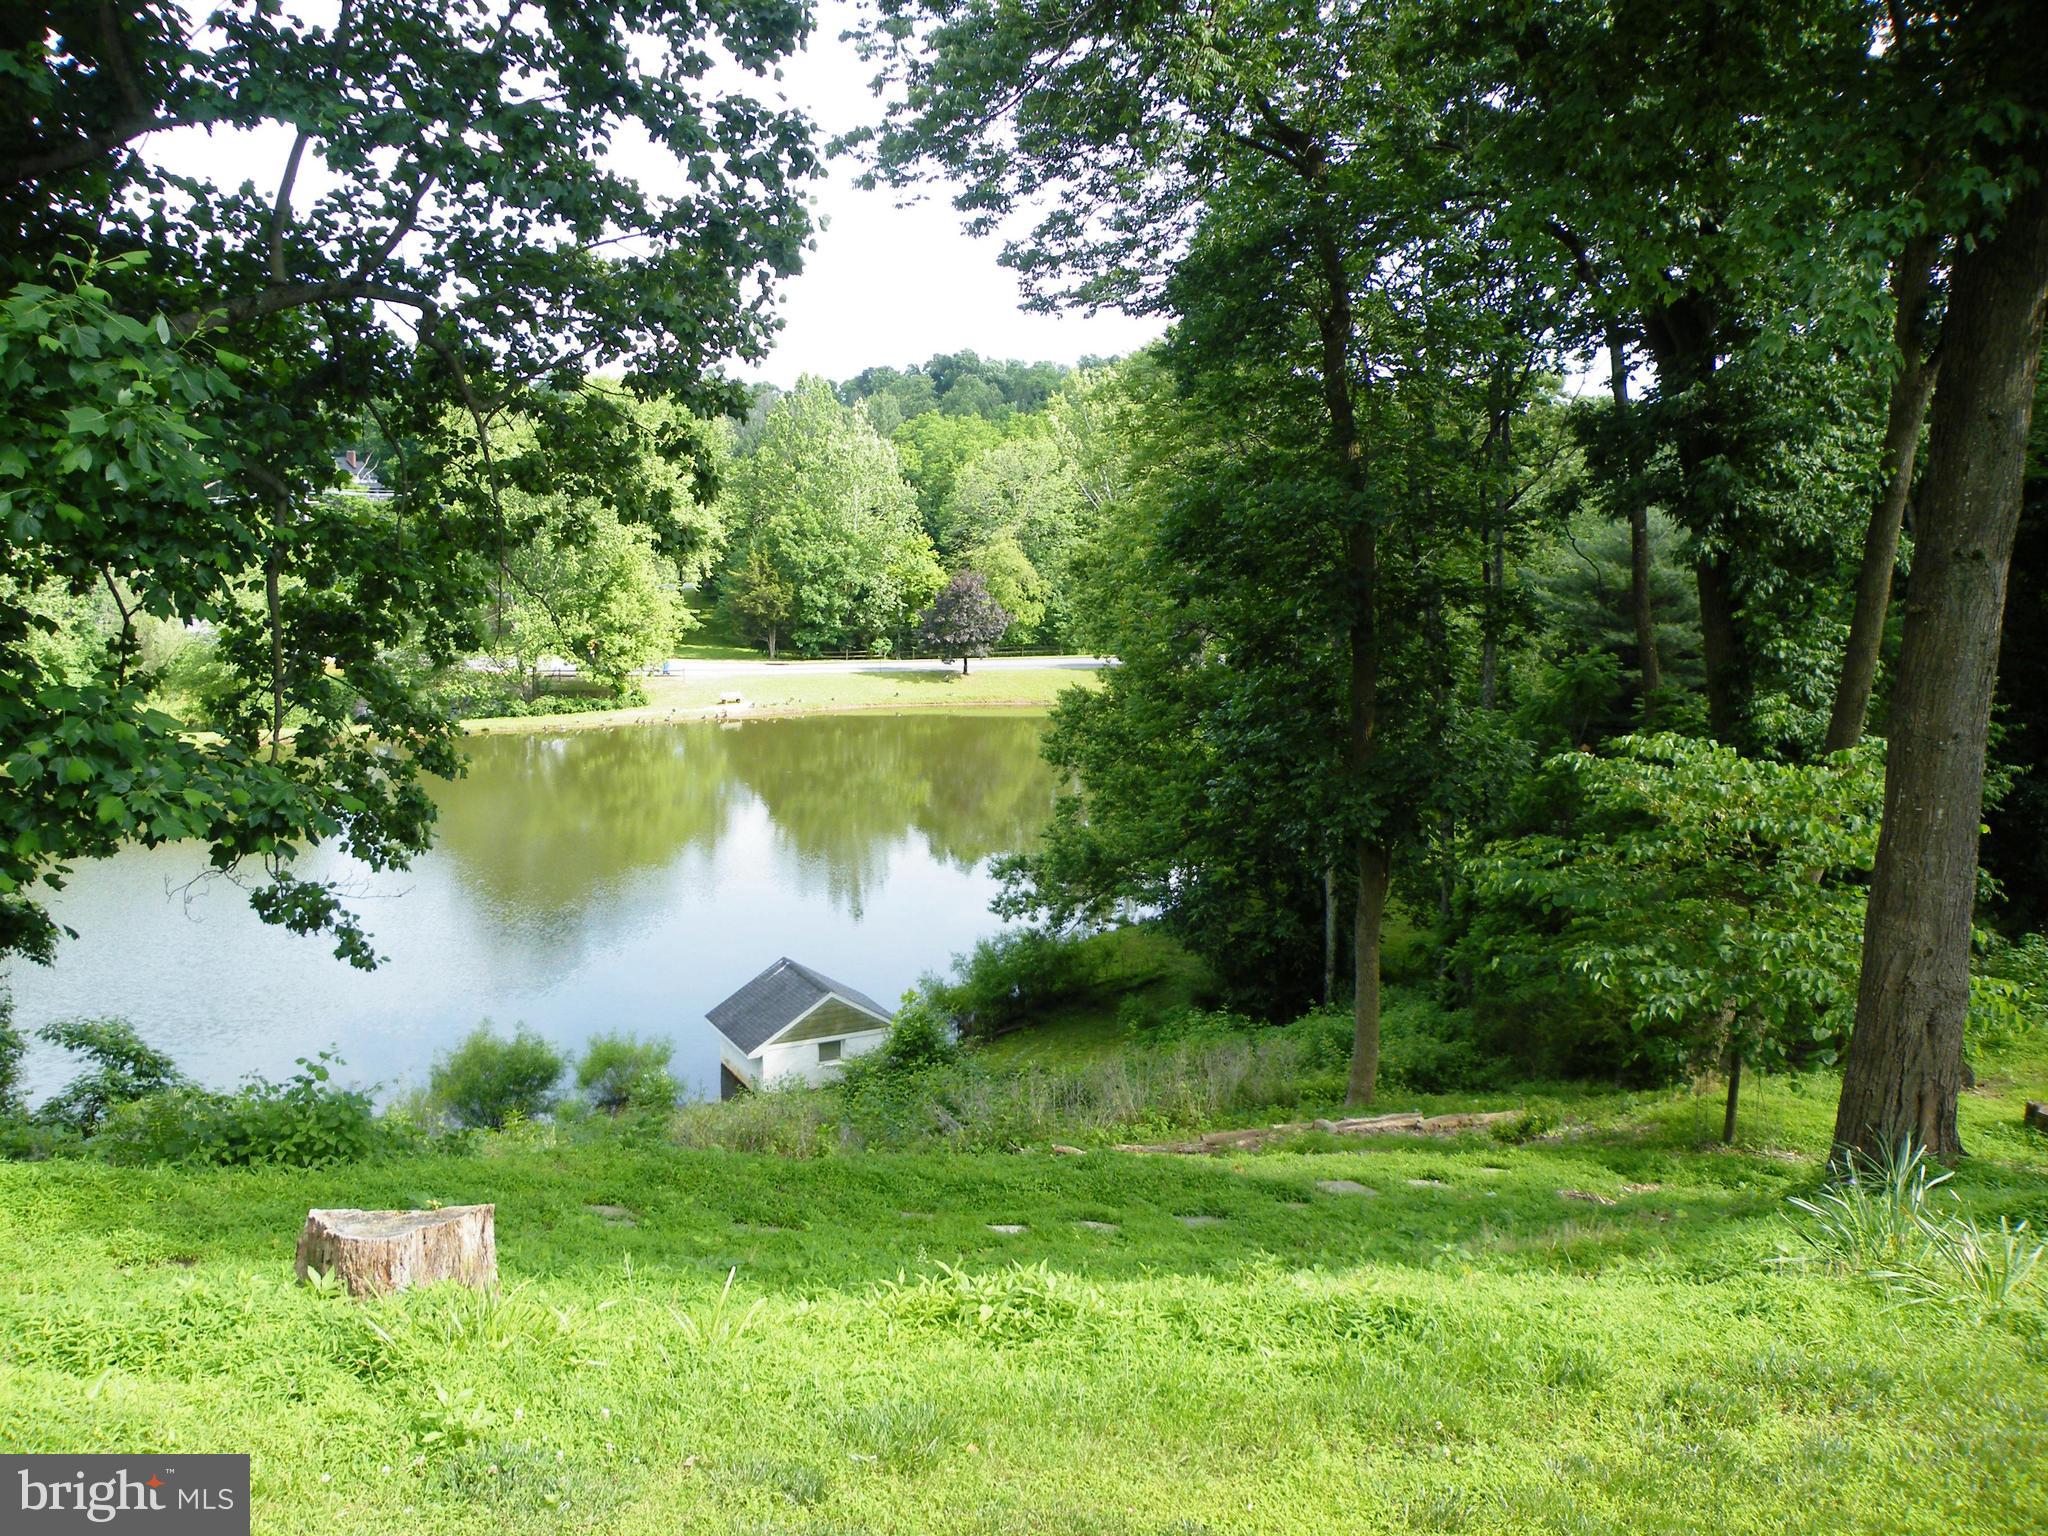 a view of a lake with a yard and large trees